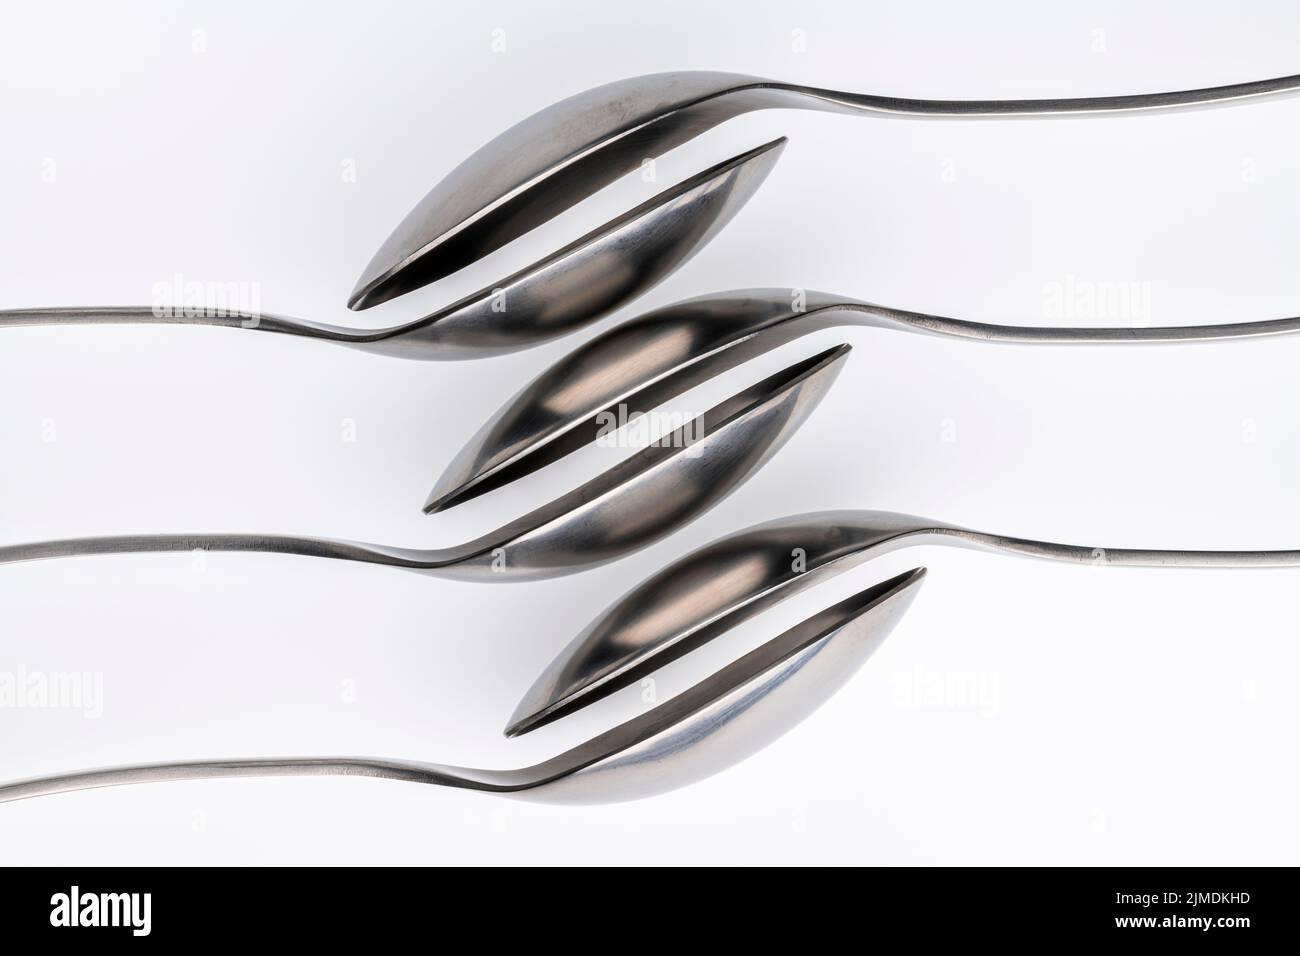 Artistic place setting photo of six spoons falling into each other Stock Photo